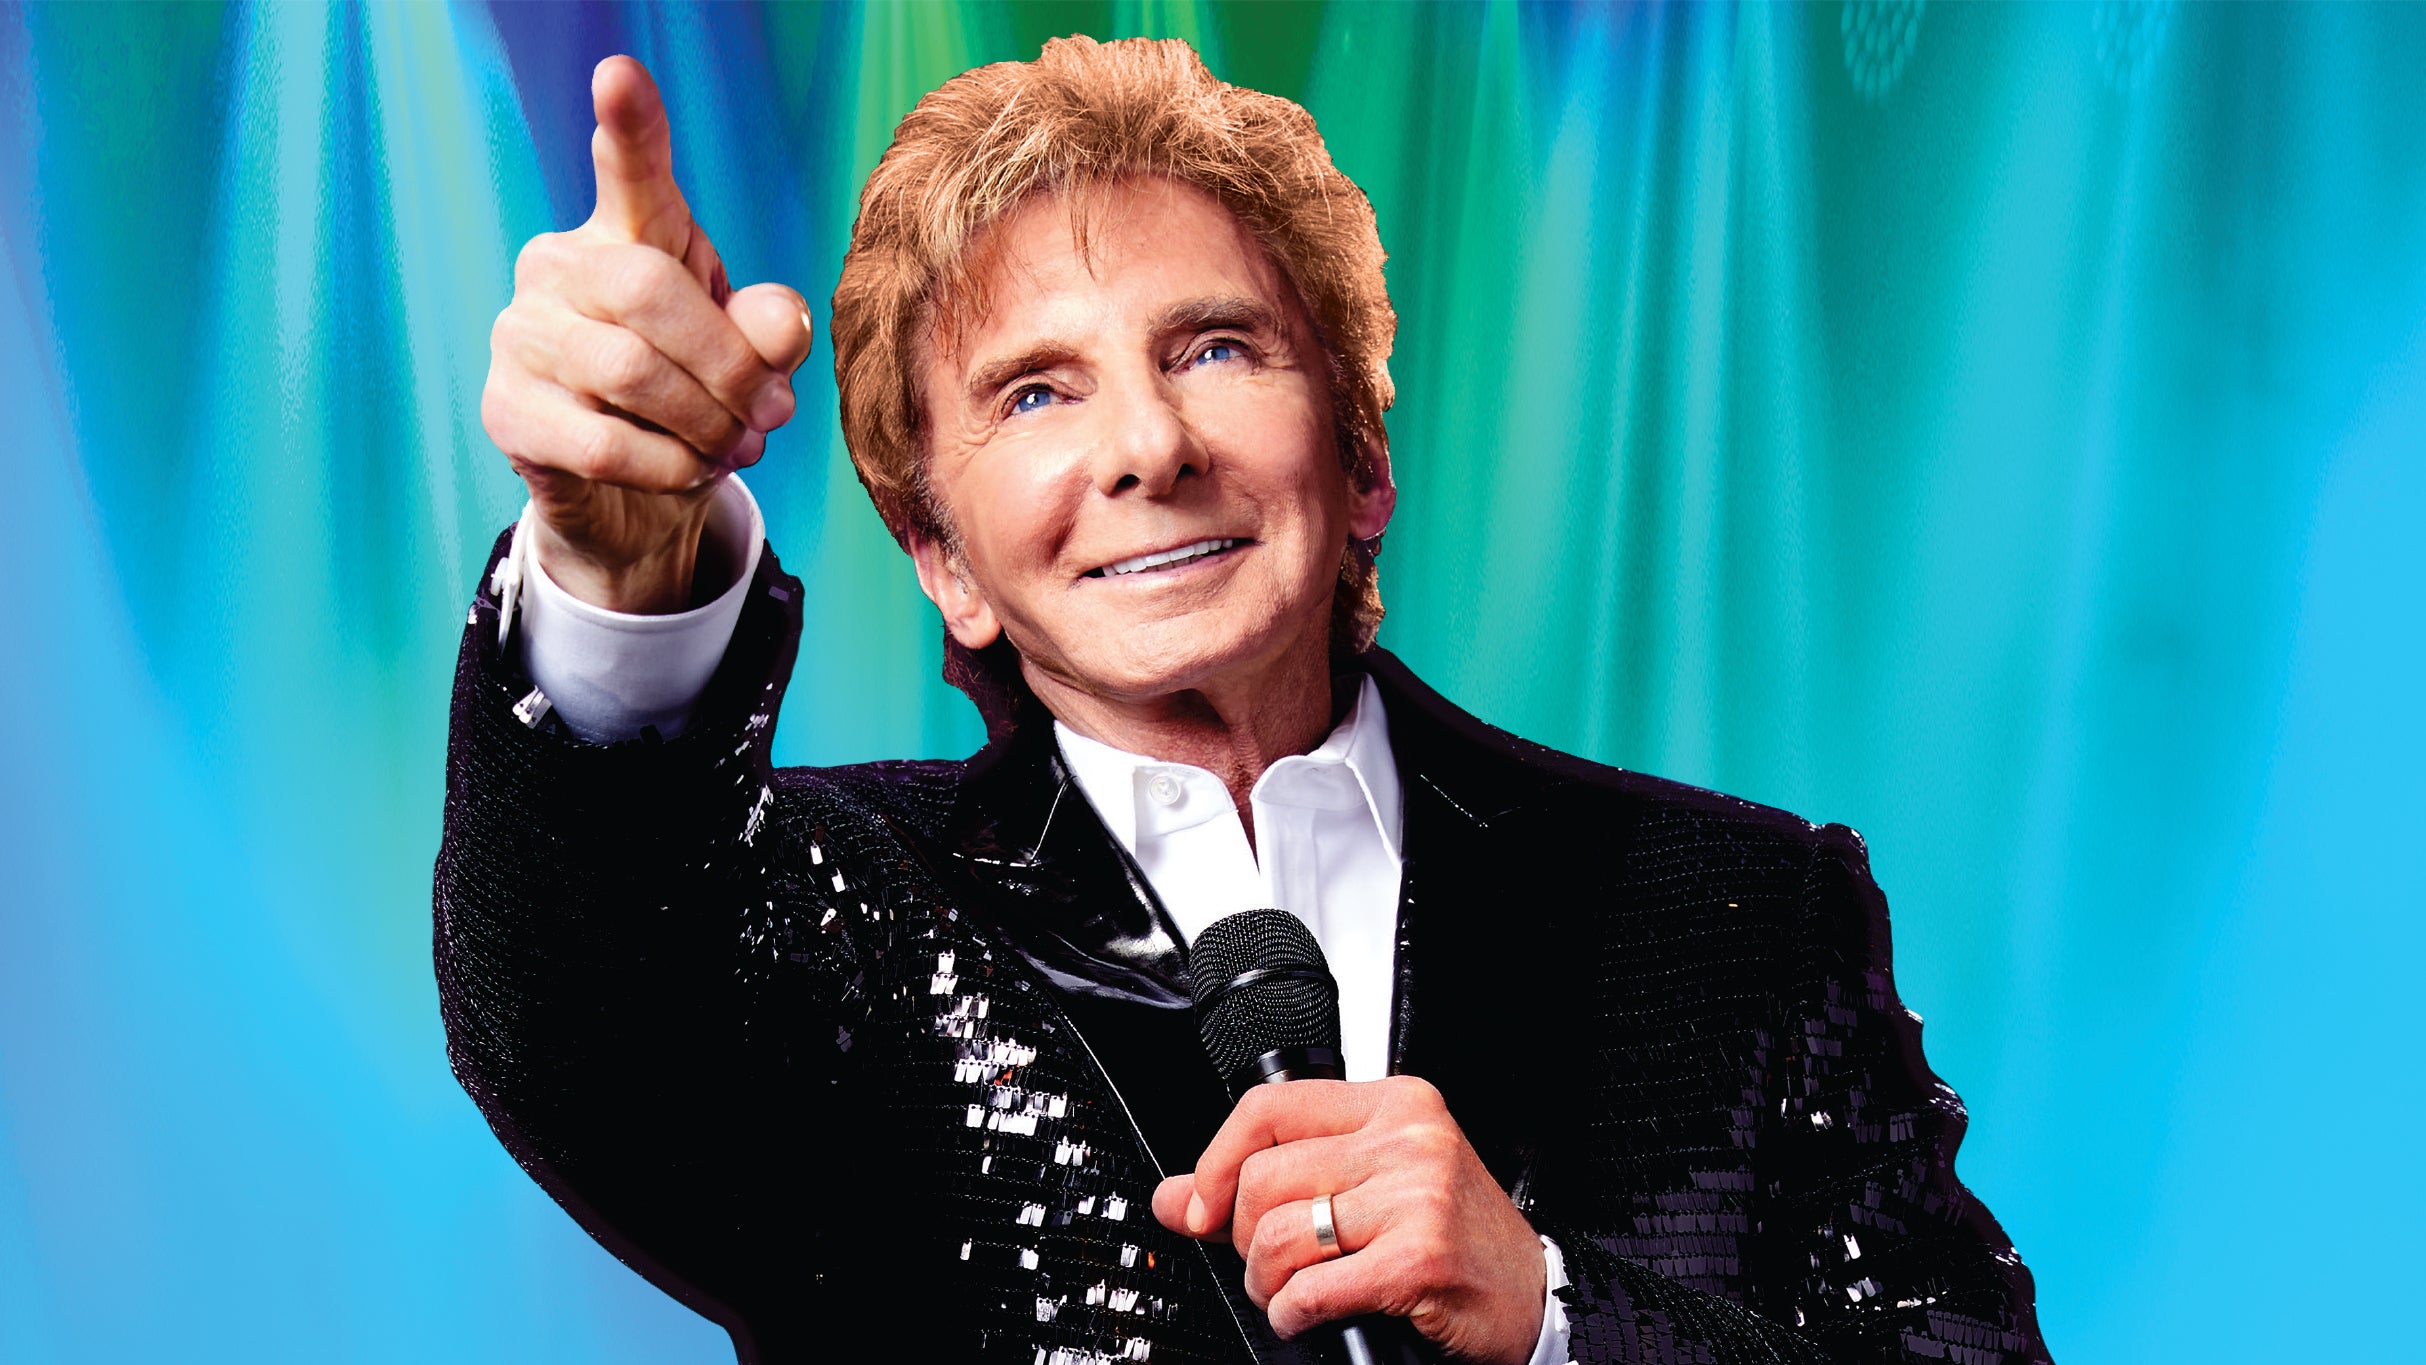 MANILOW: The Last Chicago Concert free pre-sale password for early tickets in Rosemont